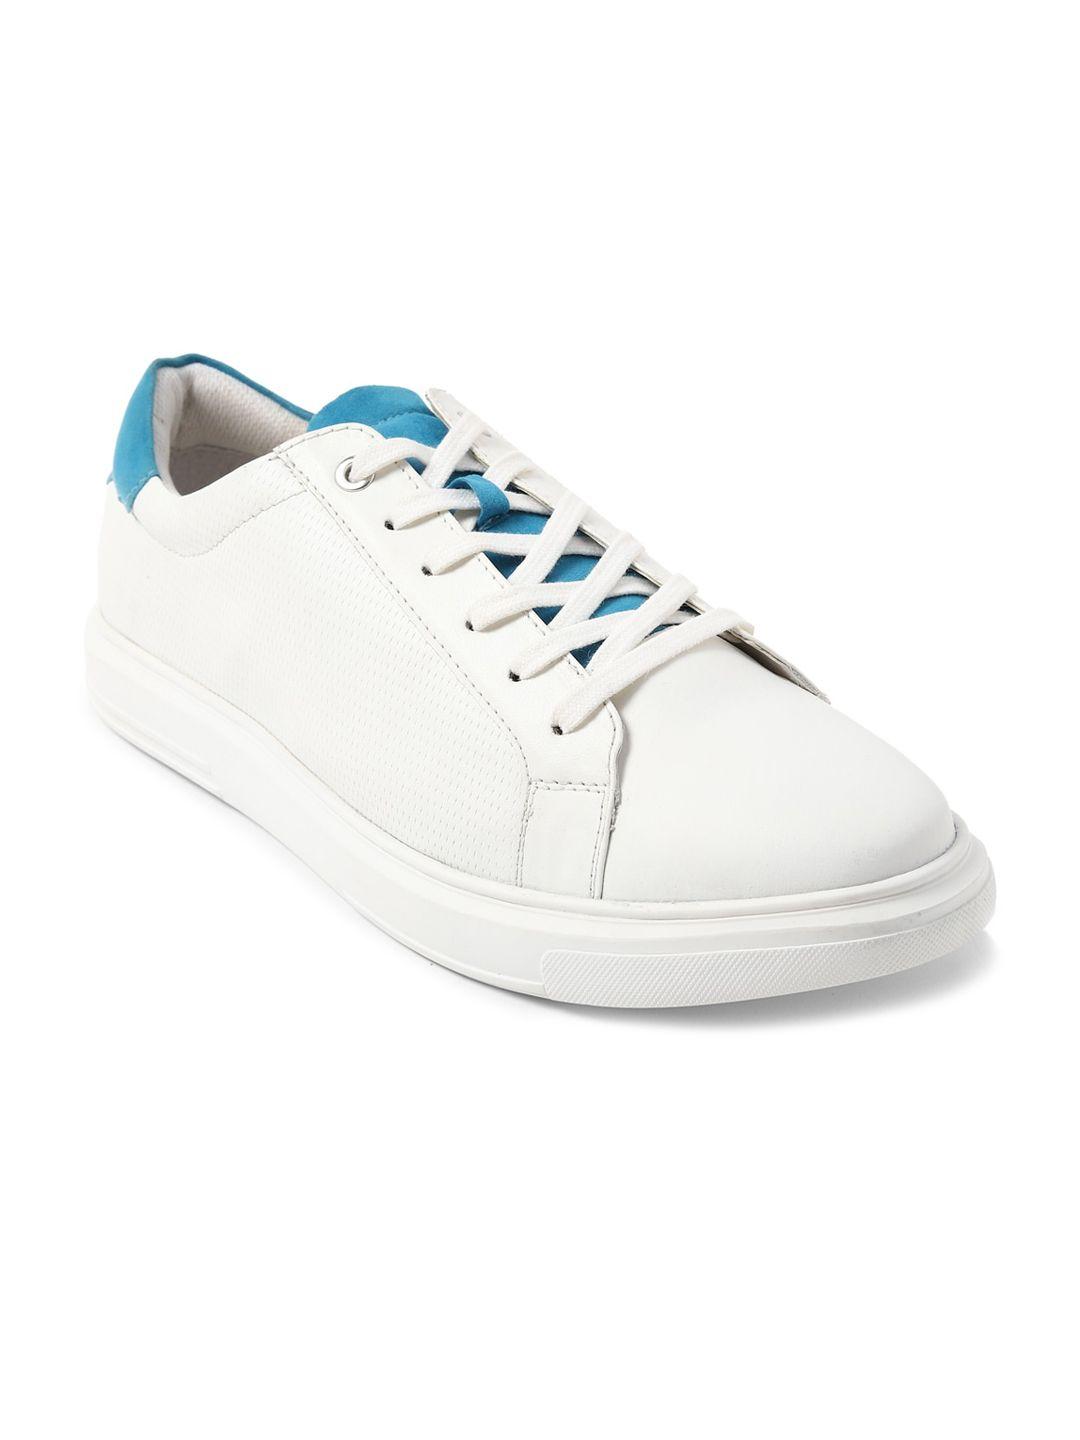 forever 21 men blue textured pu sneakers